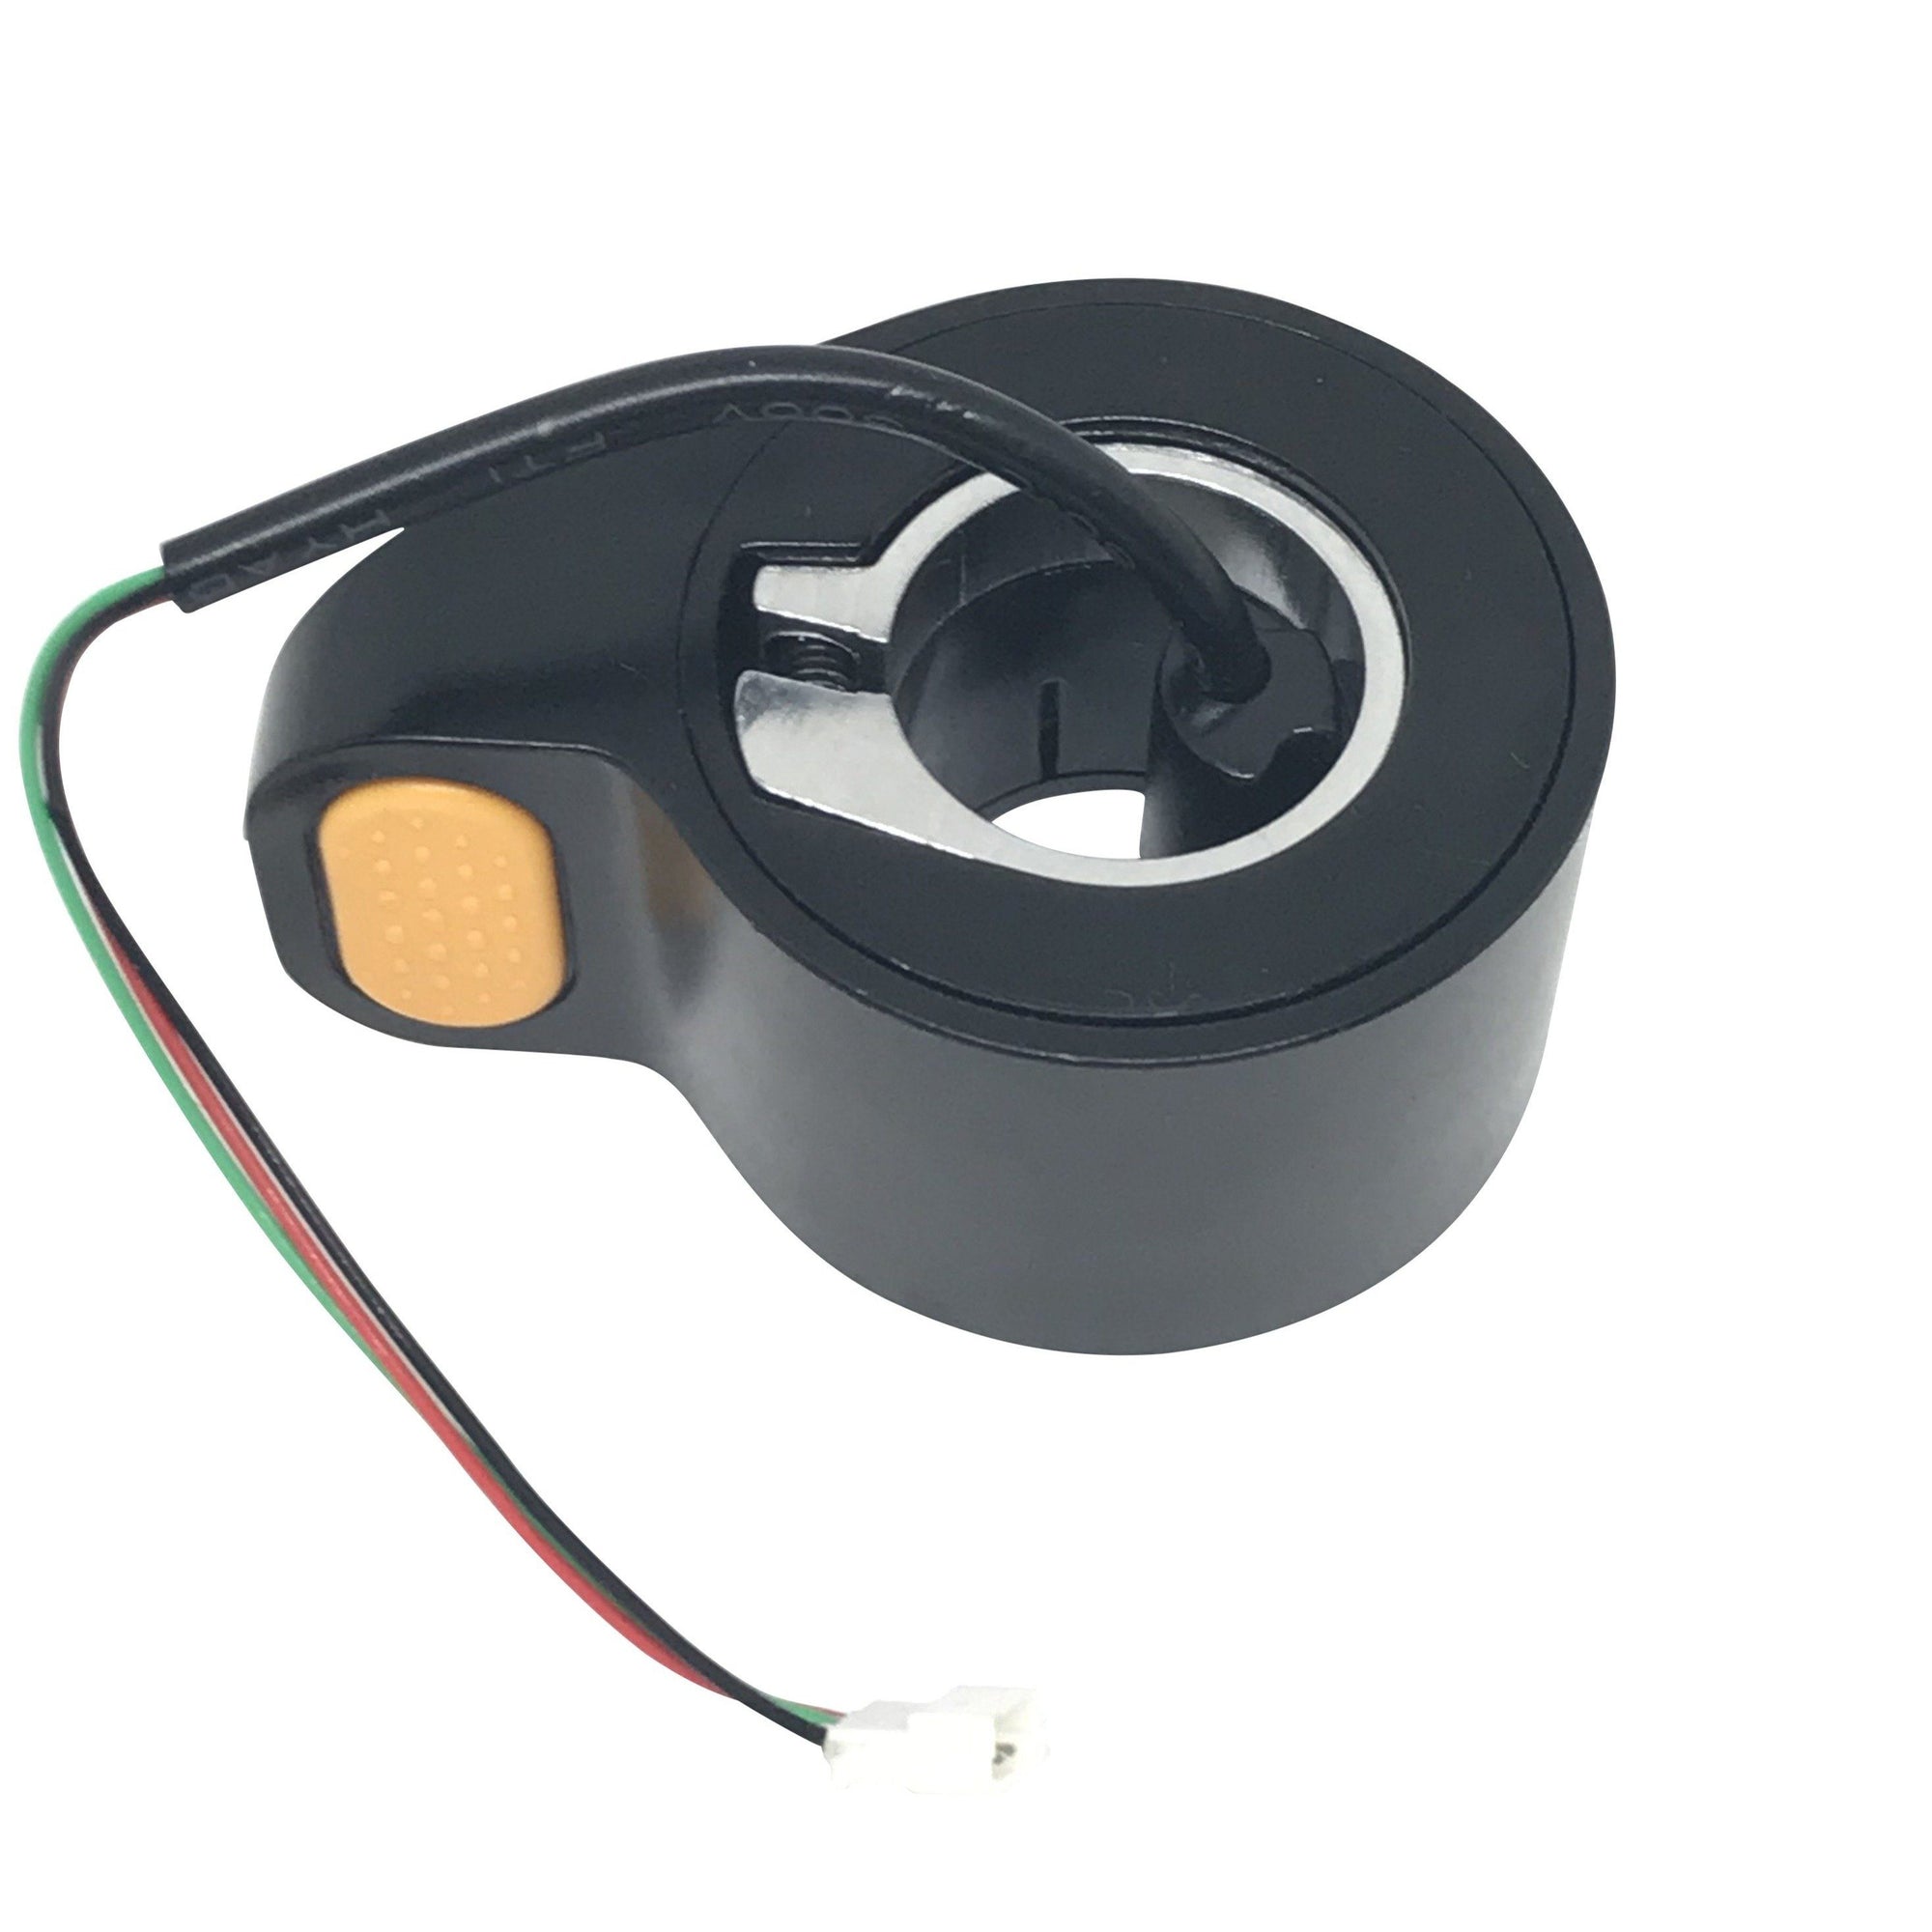 Replacement Accelerator for Xiaomi m365 Kick Scooters